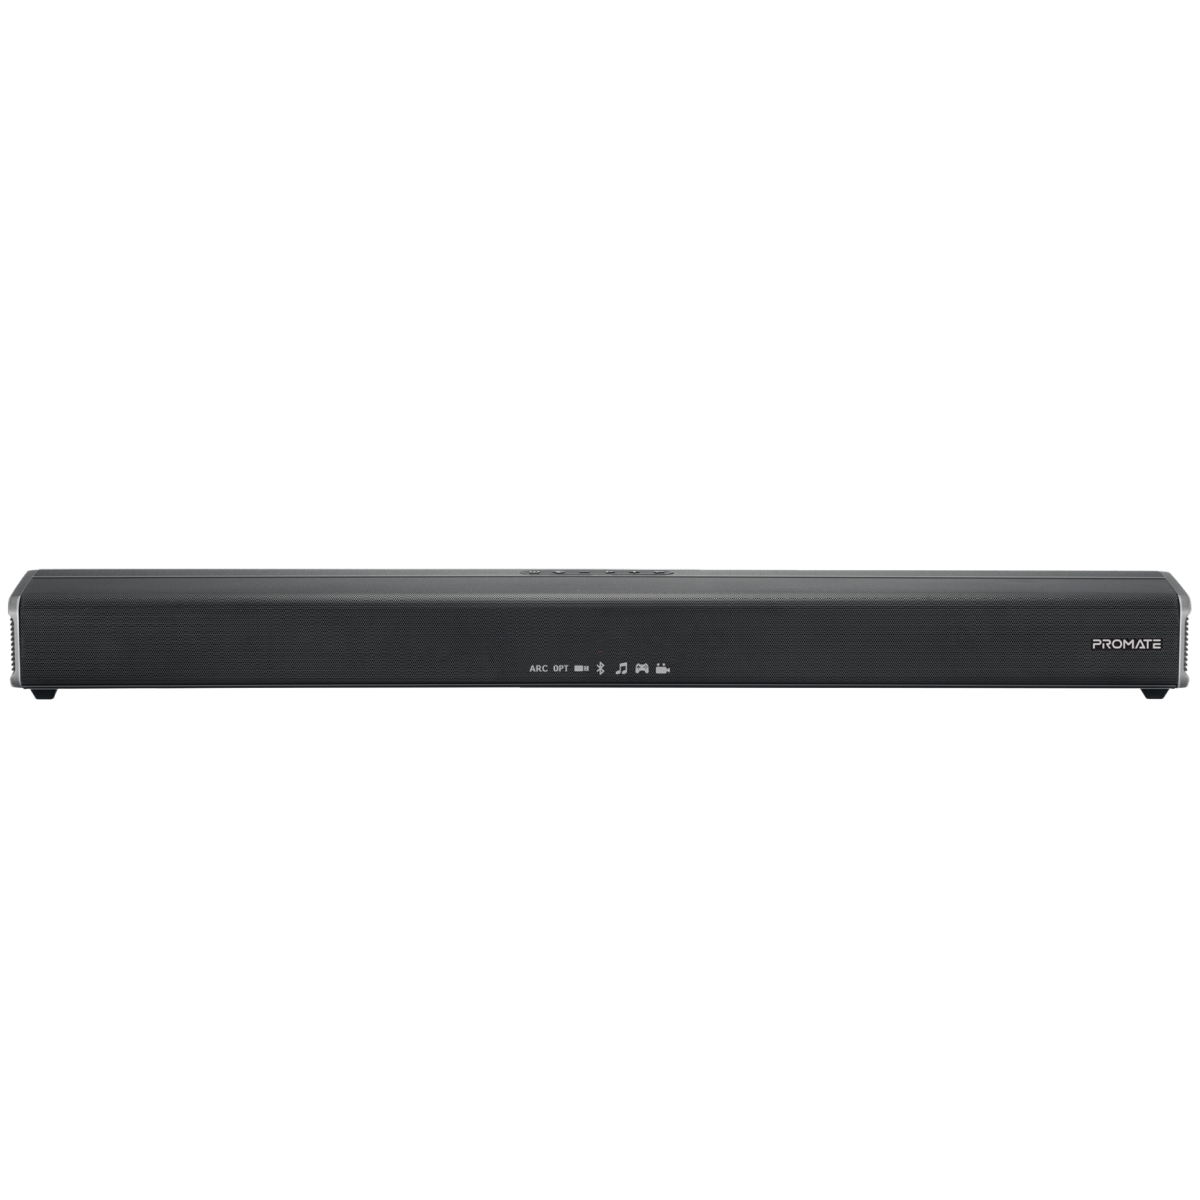 Promate Soundbar Speaker with 60W Subwoofer, Multiple Connectivity and Remote Control, CastBar-120